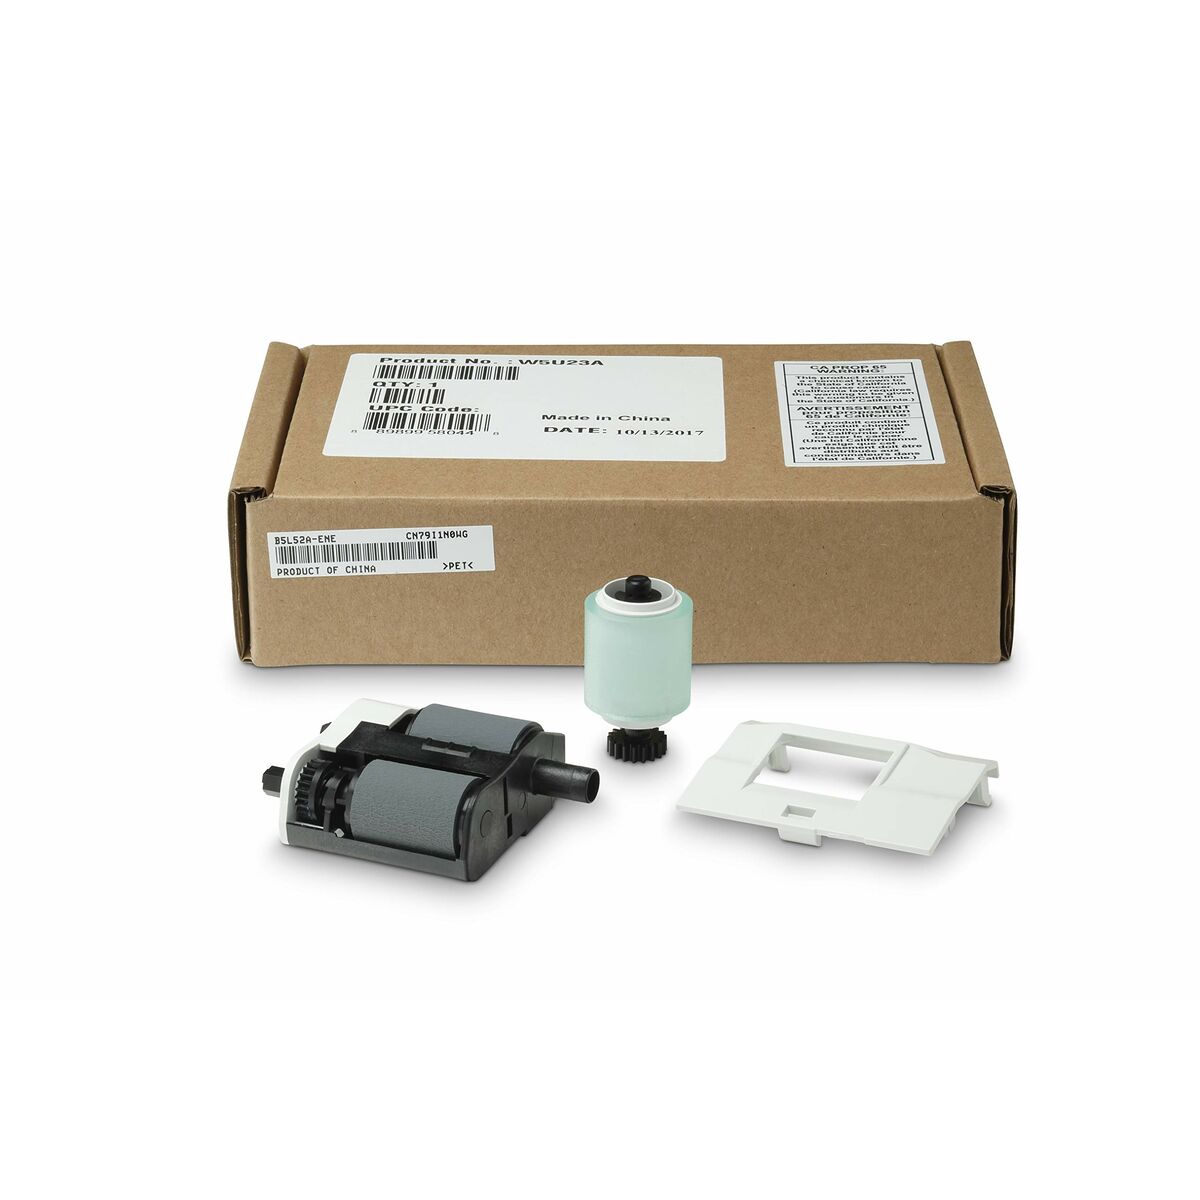 Set of spares HP 200 ADF, HP, Computing, Printers and accessories, set-of-spares-hp-200-adf, Brand_HP, category-reference-2609, category-reference-2642, category-reference-2645, category-reference-t-19685, category-reference-t-19911, category-reference-t-21377, category-reference-t-25679, category-reference-t-29845, Condition_NEW, Price_100 - 200, Teleworking, RiotNook